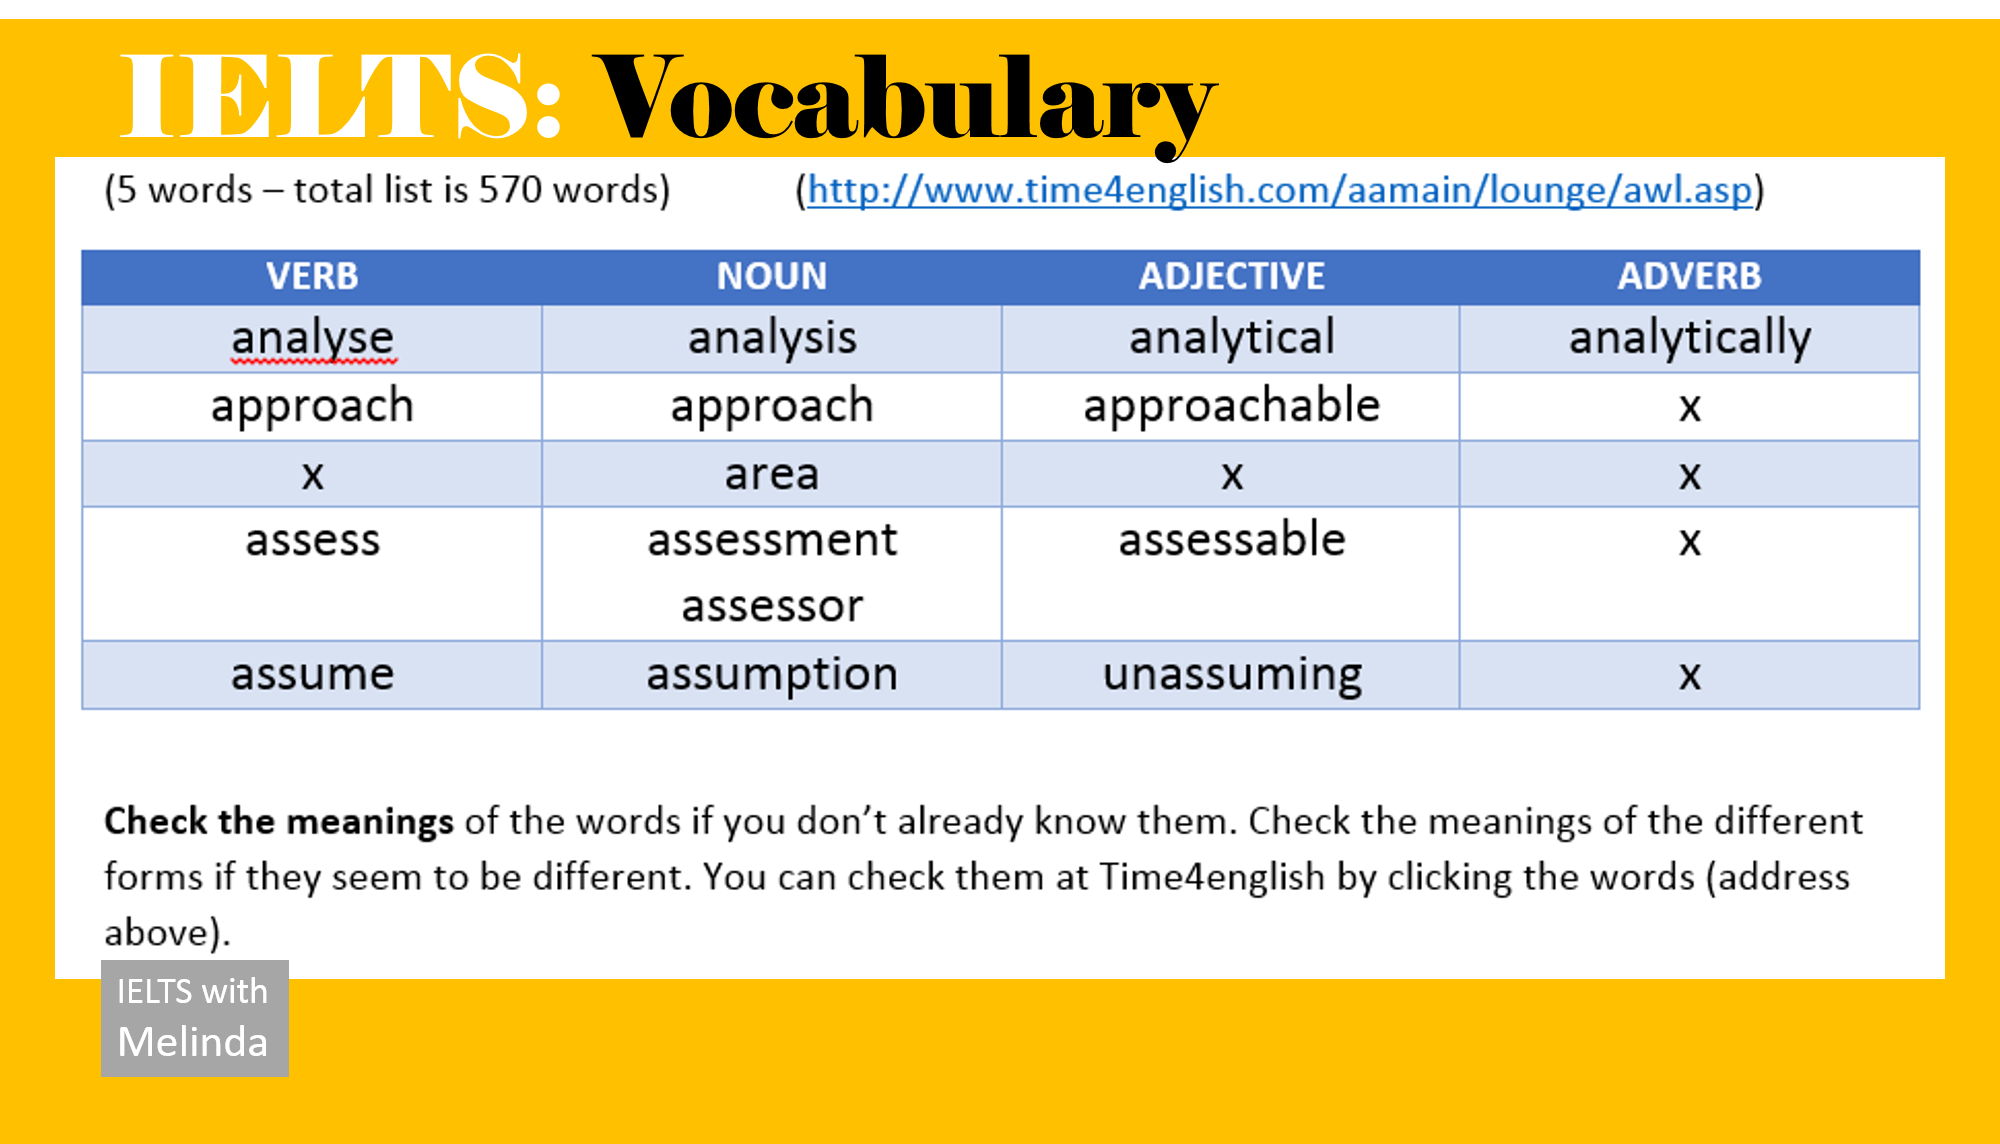 Related vocabulary. IELTS Vocabulary. IELTS Academic Vocabulary. IELTS Vocabulary Words. English Vocabulary for IELTS.